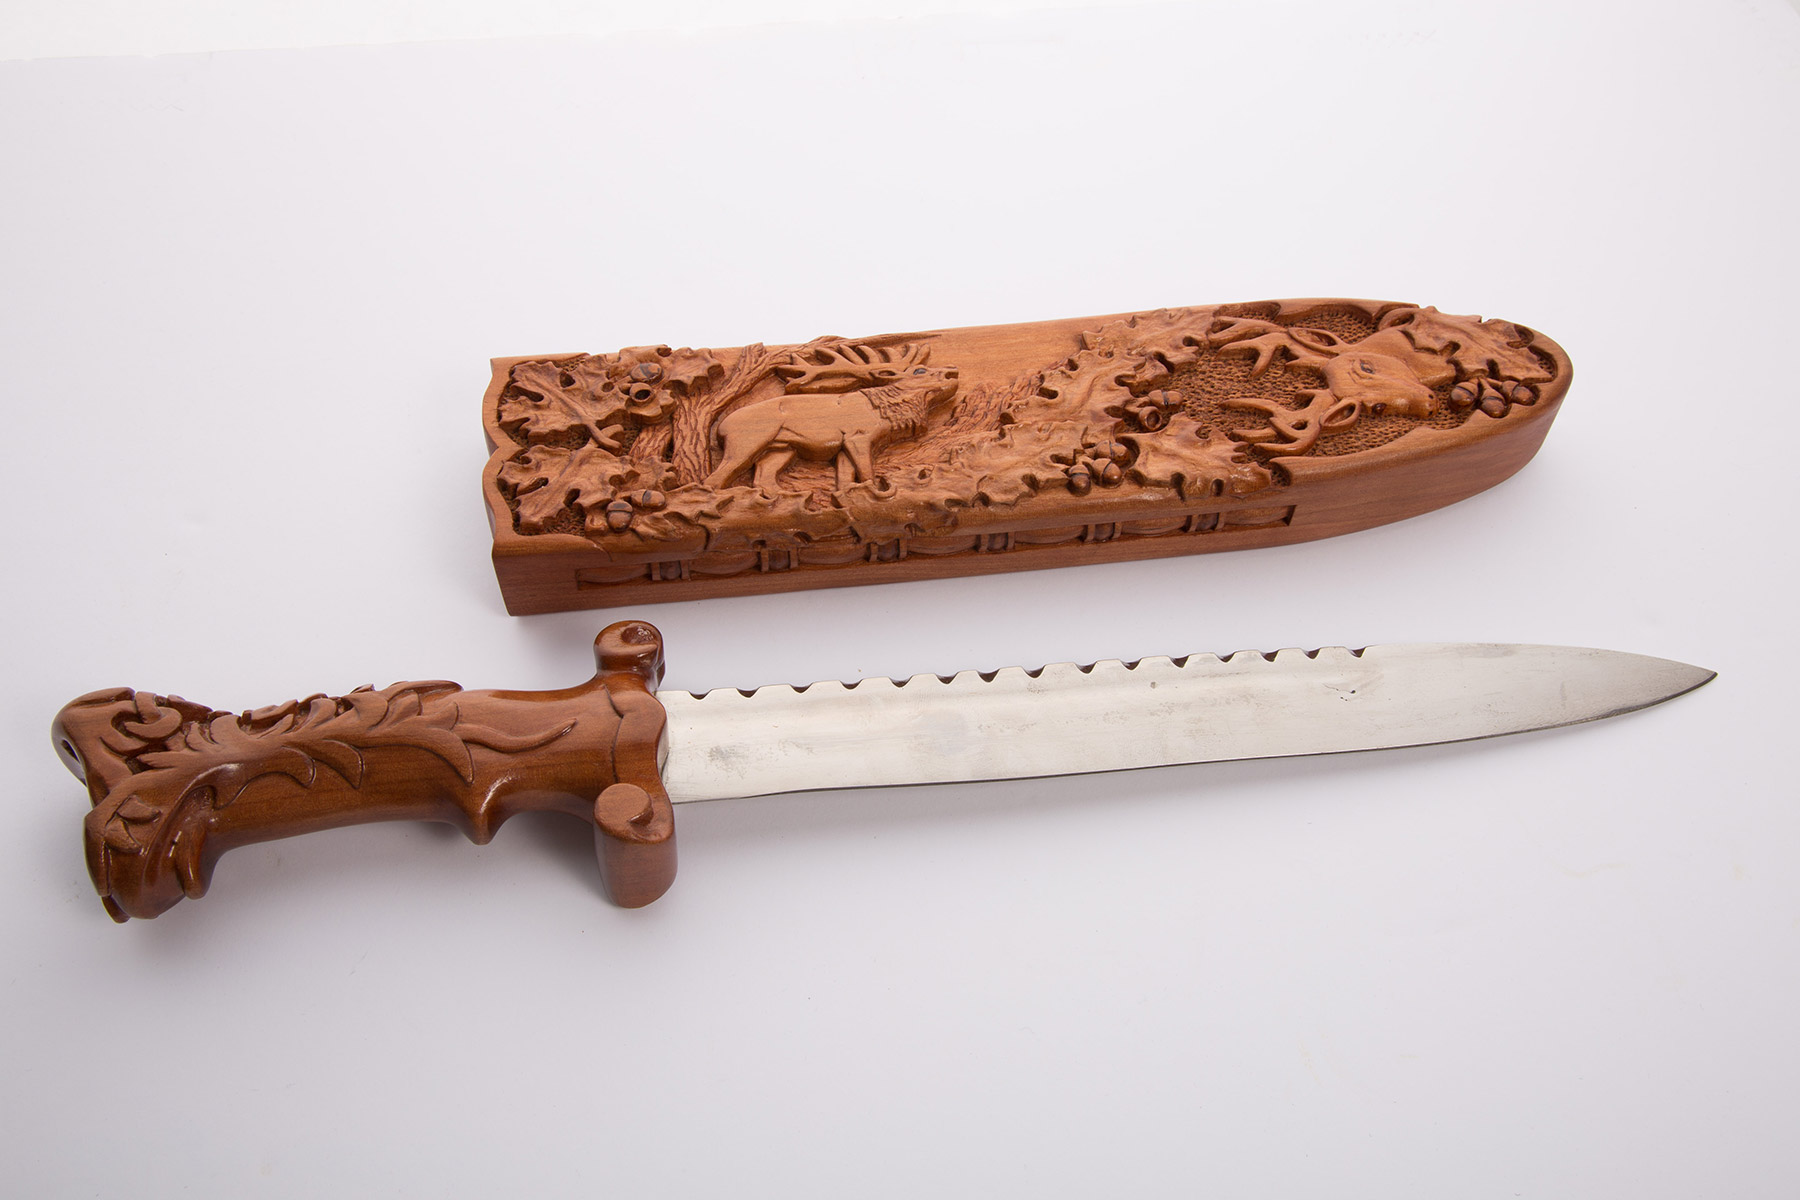 Custom made and carved knife handle and sheath (open view)